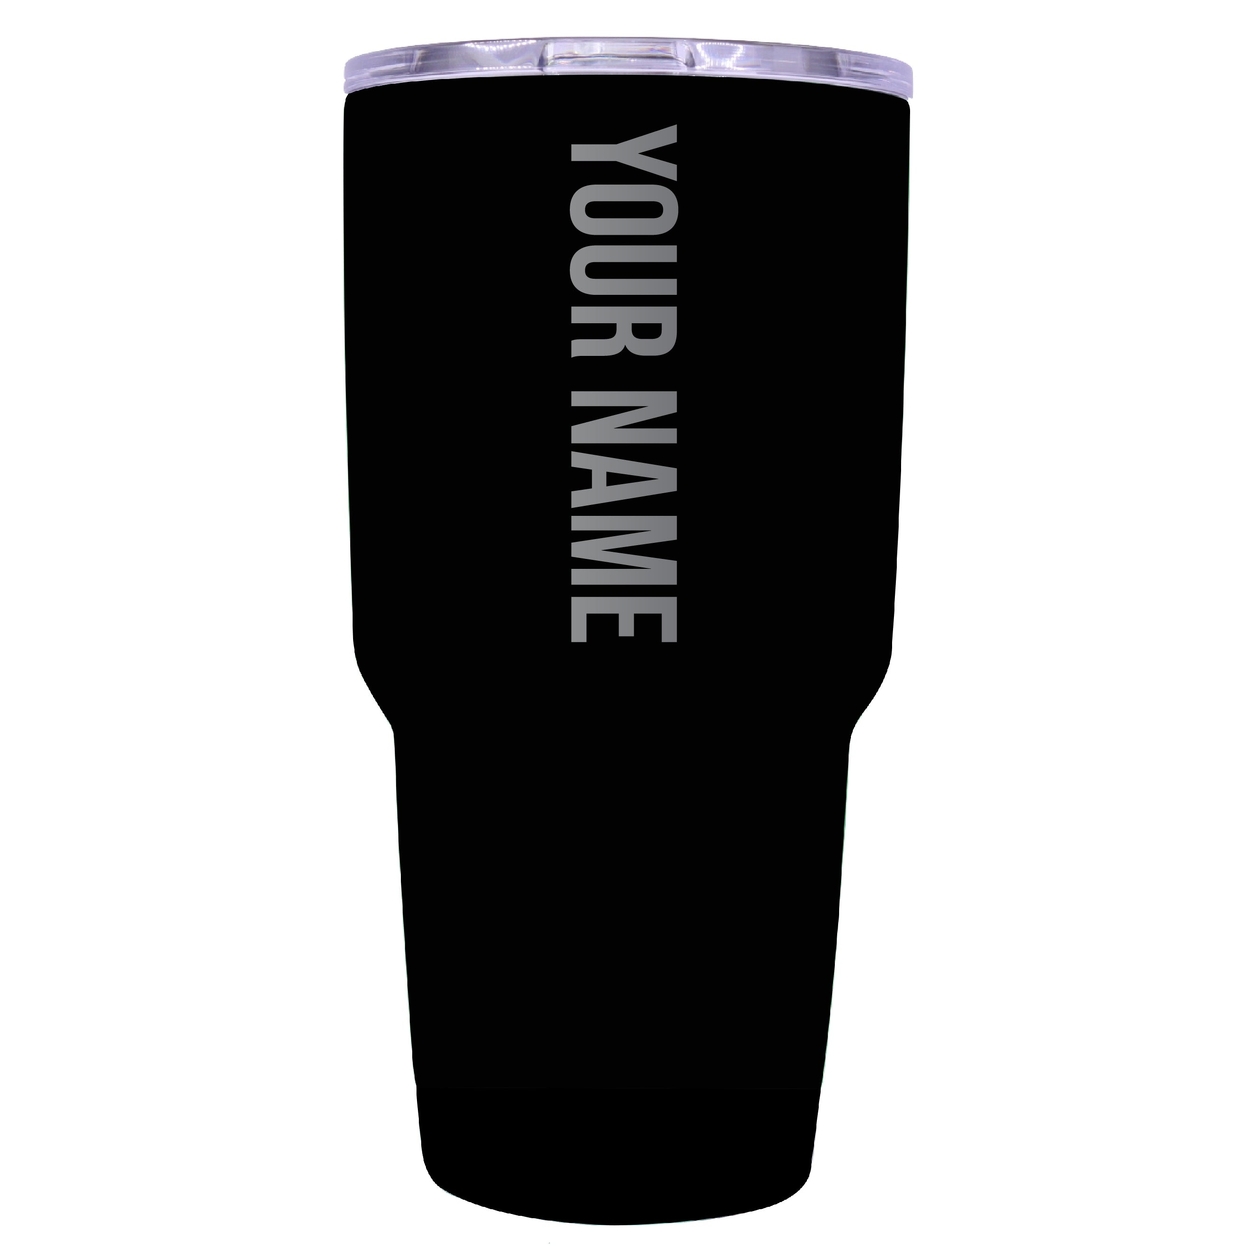 Customizable Laser Etched 24 Oz Insulated Stainless Steel Tumbler Personalized With Custom Name Or Message - Black, 2 Pack